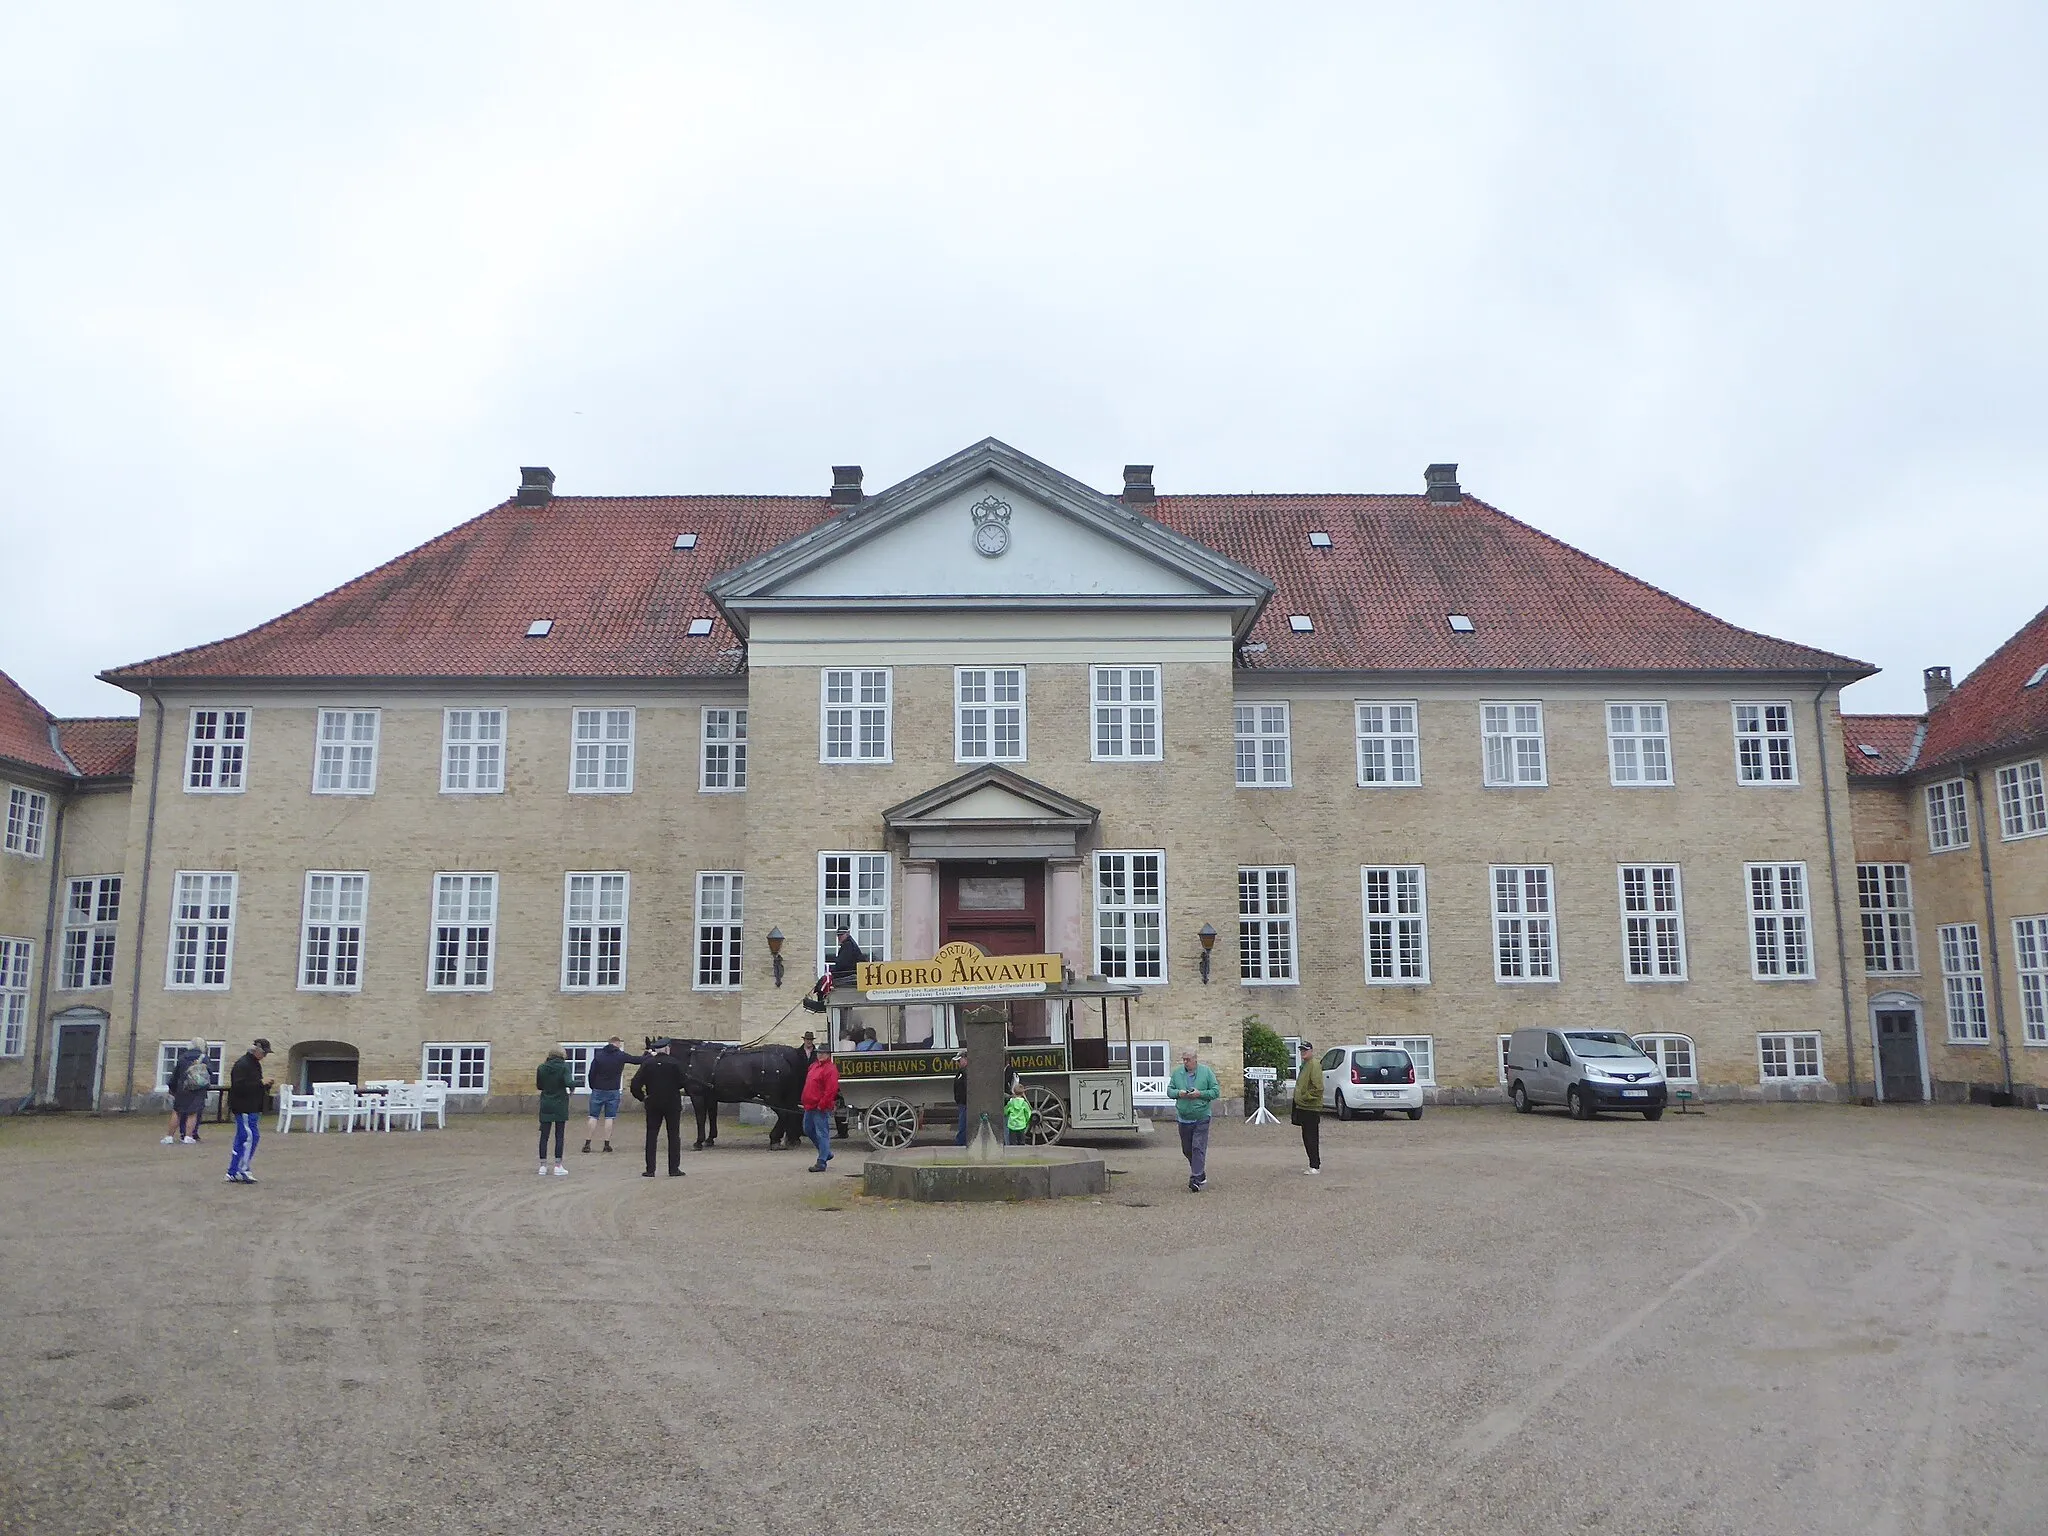 Photo showing: The horse-drawn bus KO 17 from 1897 from Copenhagen at the main building of the estate Skjoldenæsholm. The bus belongs to Sporvejsmuseet Skjoldenæsholm which provides trips with it to the estate and back on certain days.